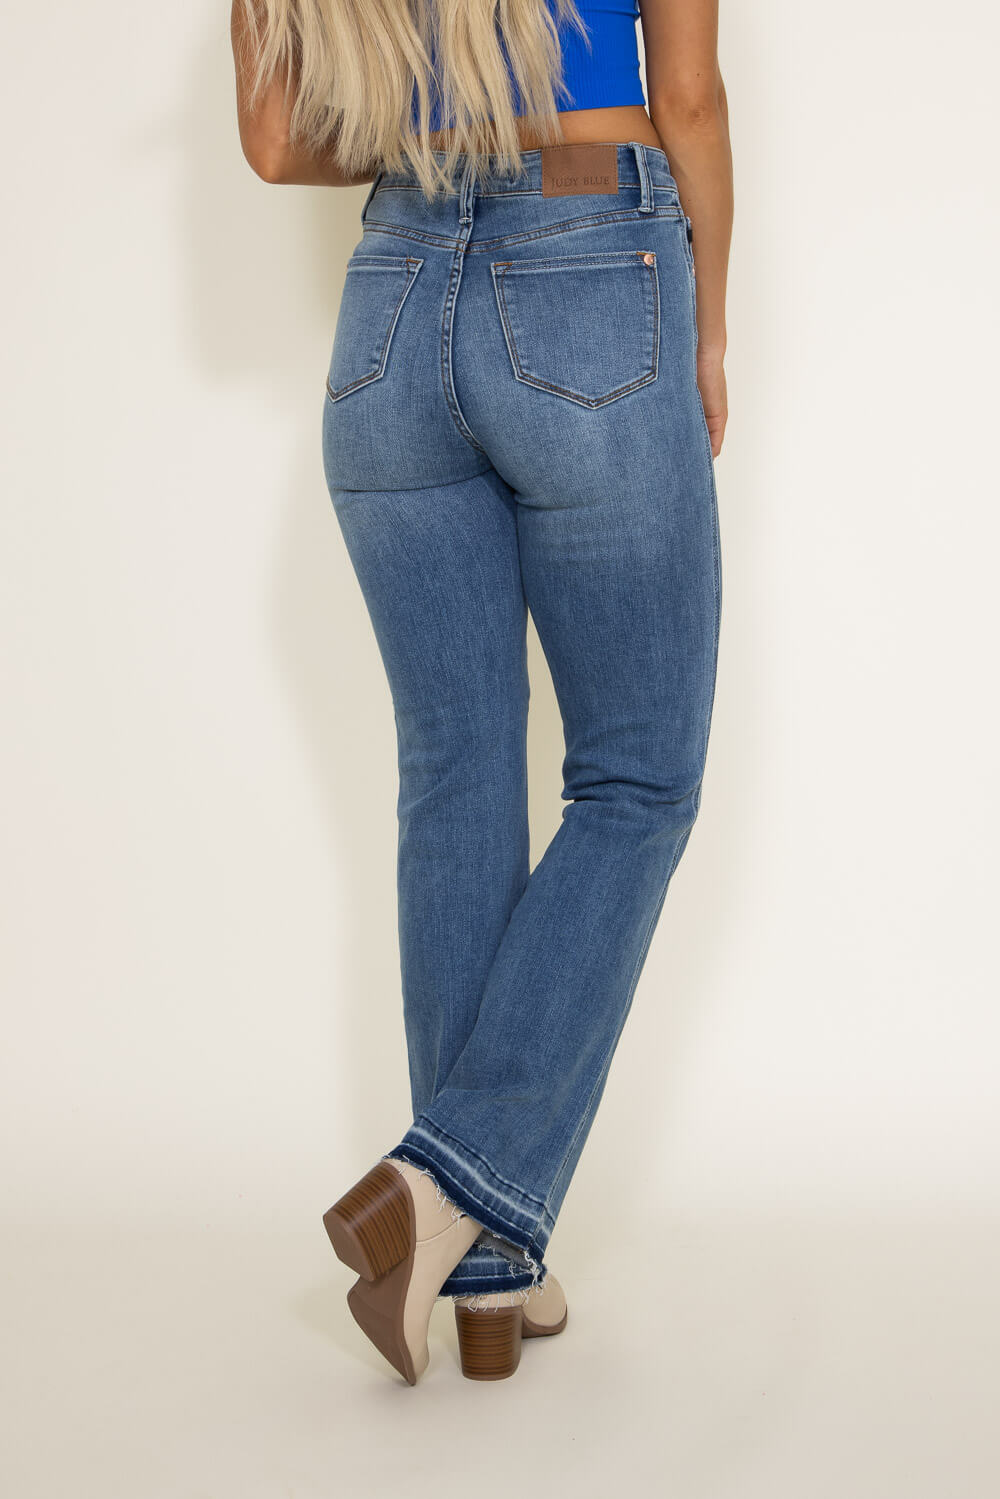 Judy Blue Perfet Fit Tummy Control Bootcut Jeans